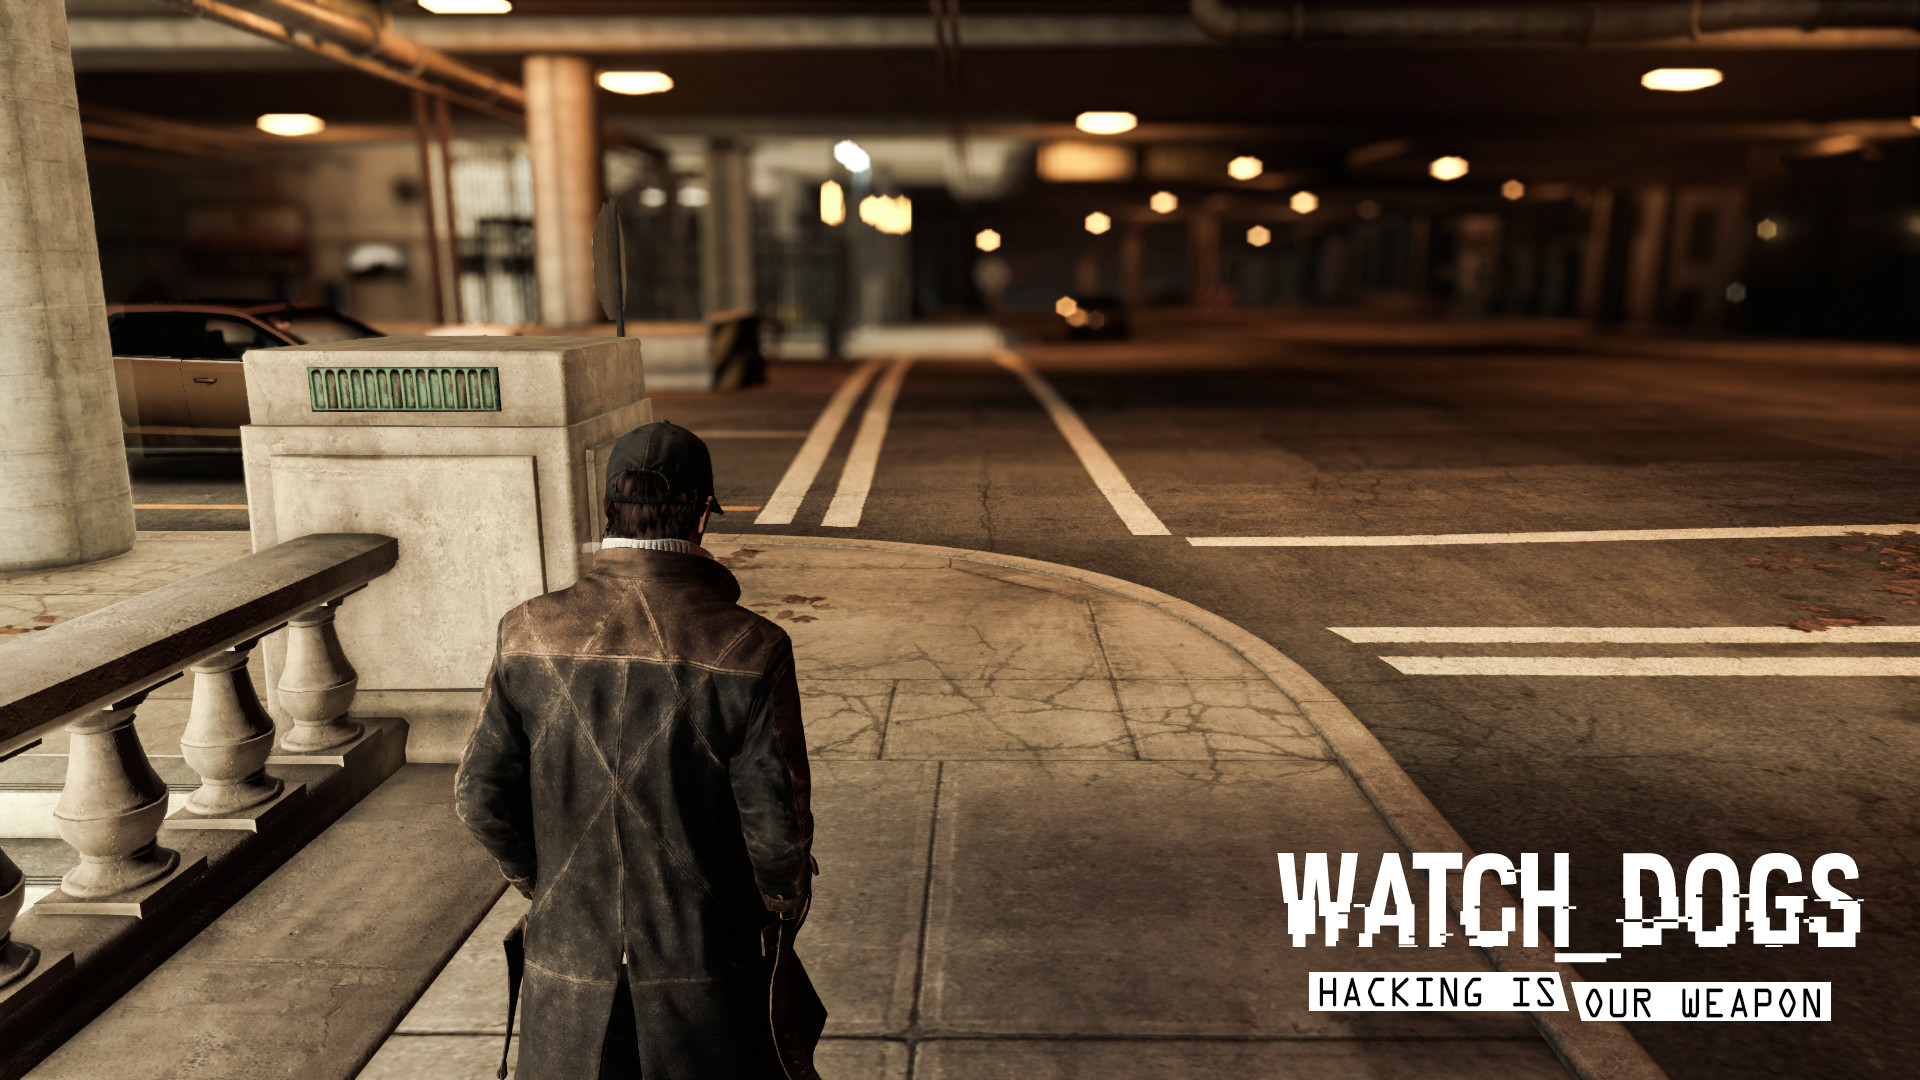 Watch Dogs Hacking Is Our Weapon Desktop Wallpaper Uploaded By